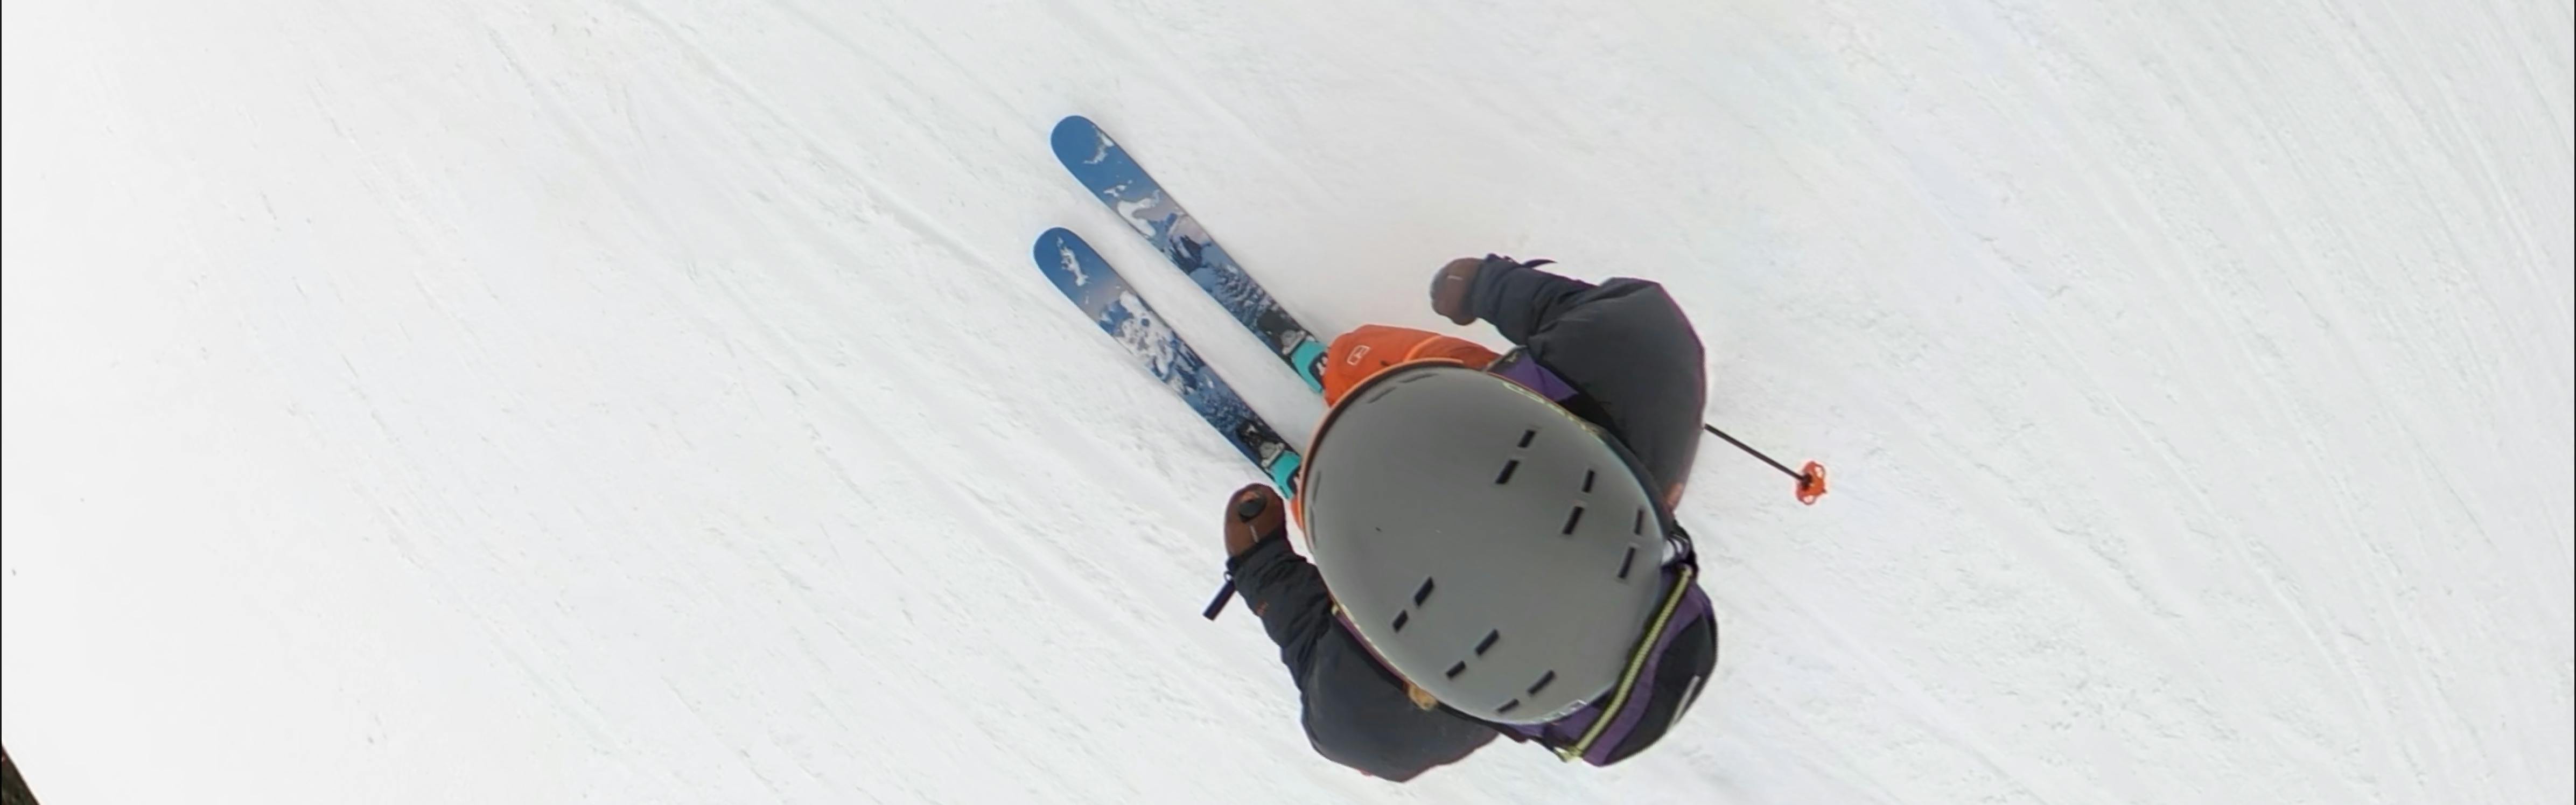 Top down view of a skier on the  Nordica Santa Ana 93. 